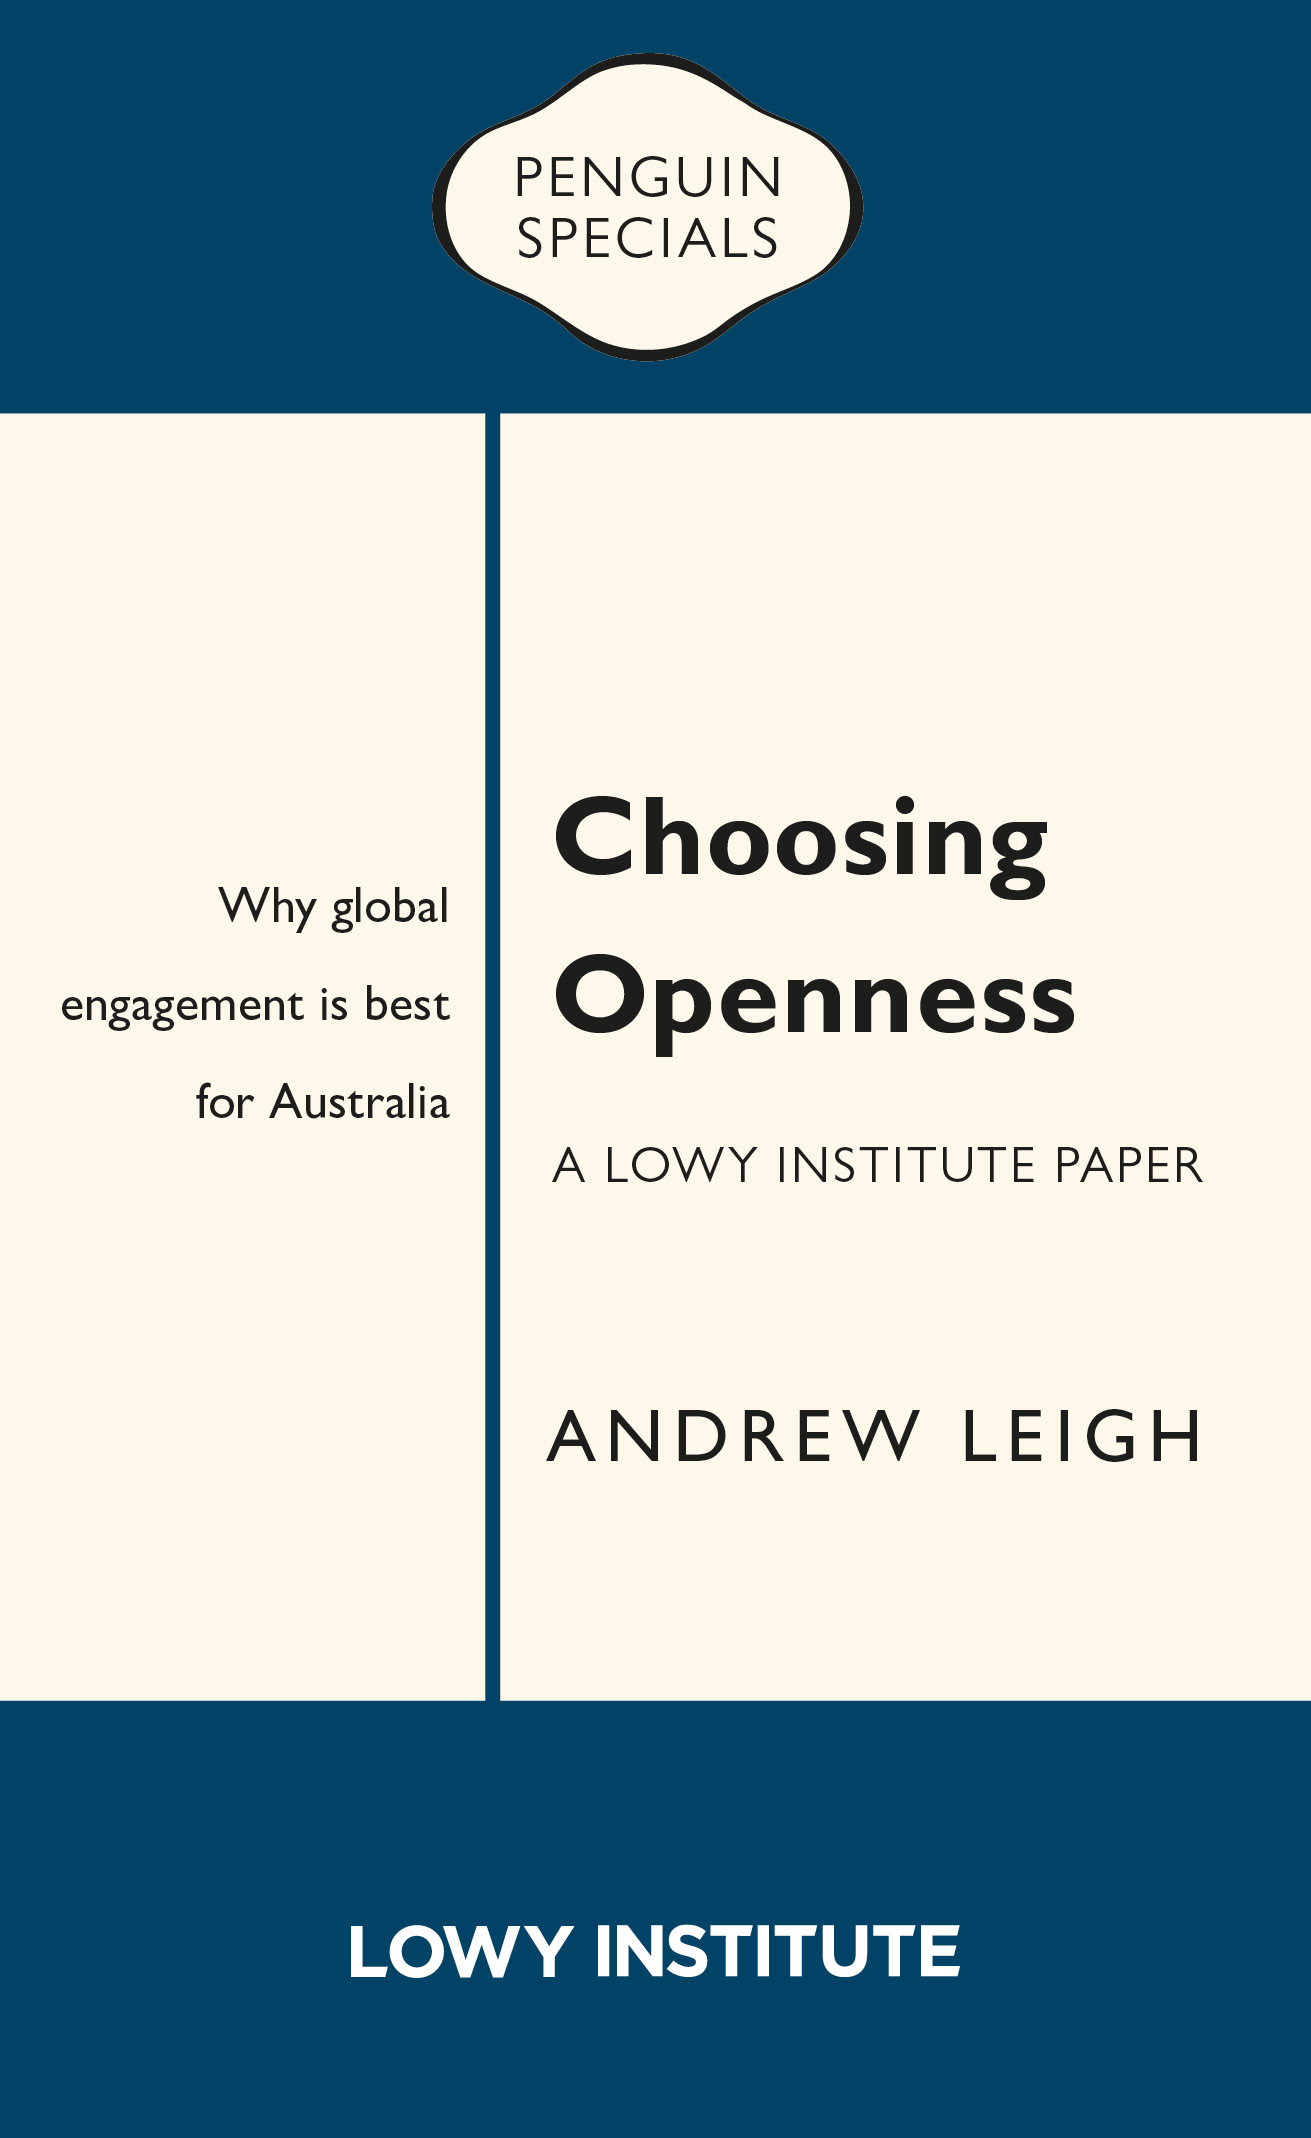 Discussing "Choosing Openness" with Lowy Institute Executive Director Michael Fullilove